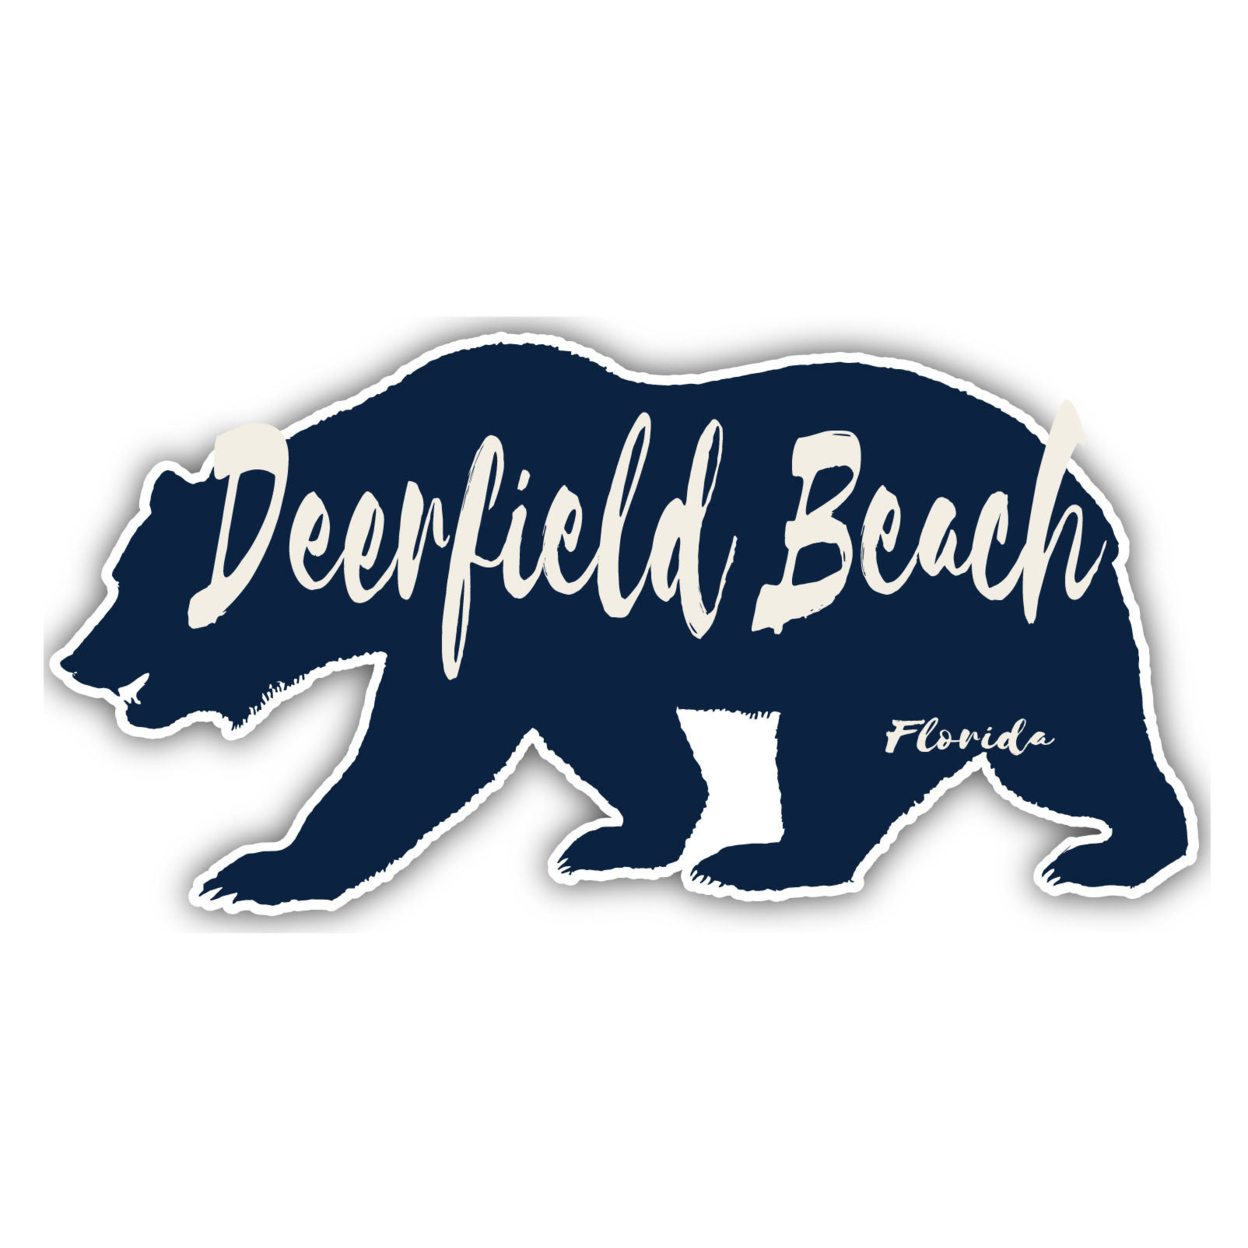 Deerfield Beach Florida Souvenir Decorative Stickers (Choose Theme And Size) - Single Unit, 12-Inch, Great Outdoors